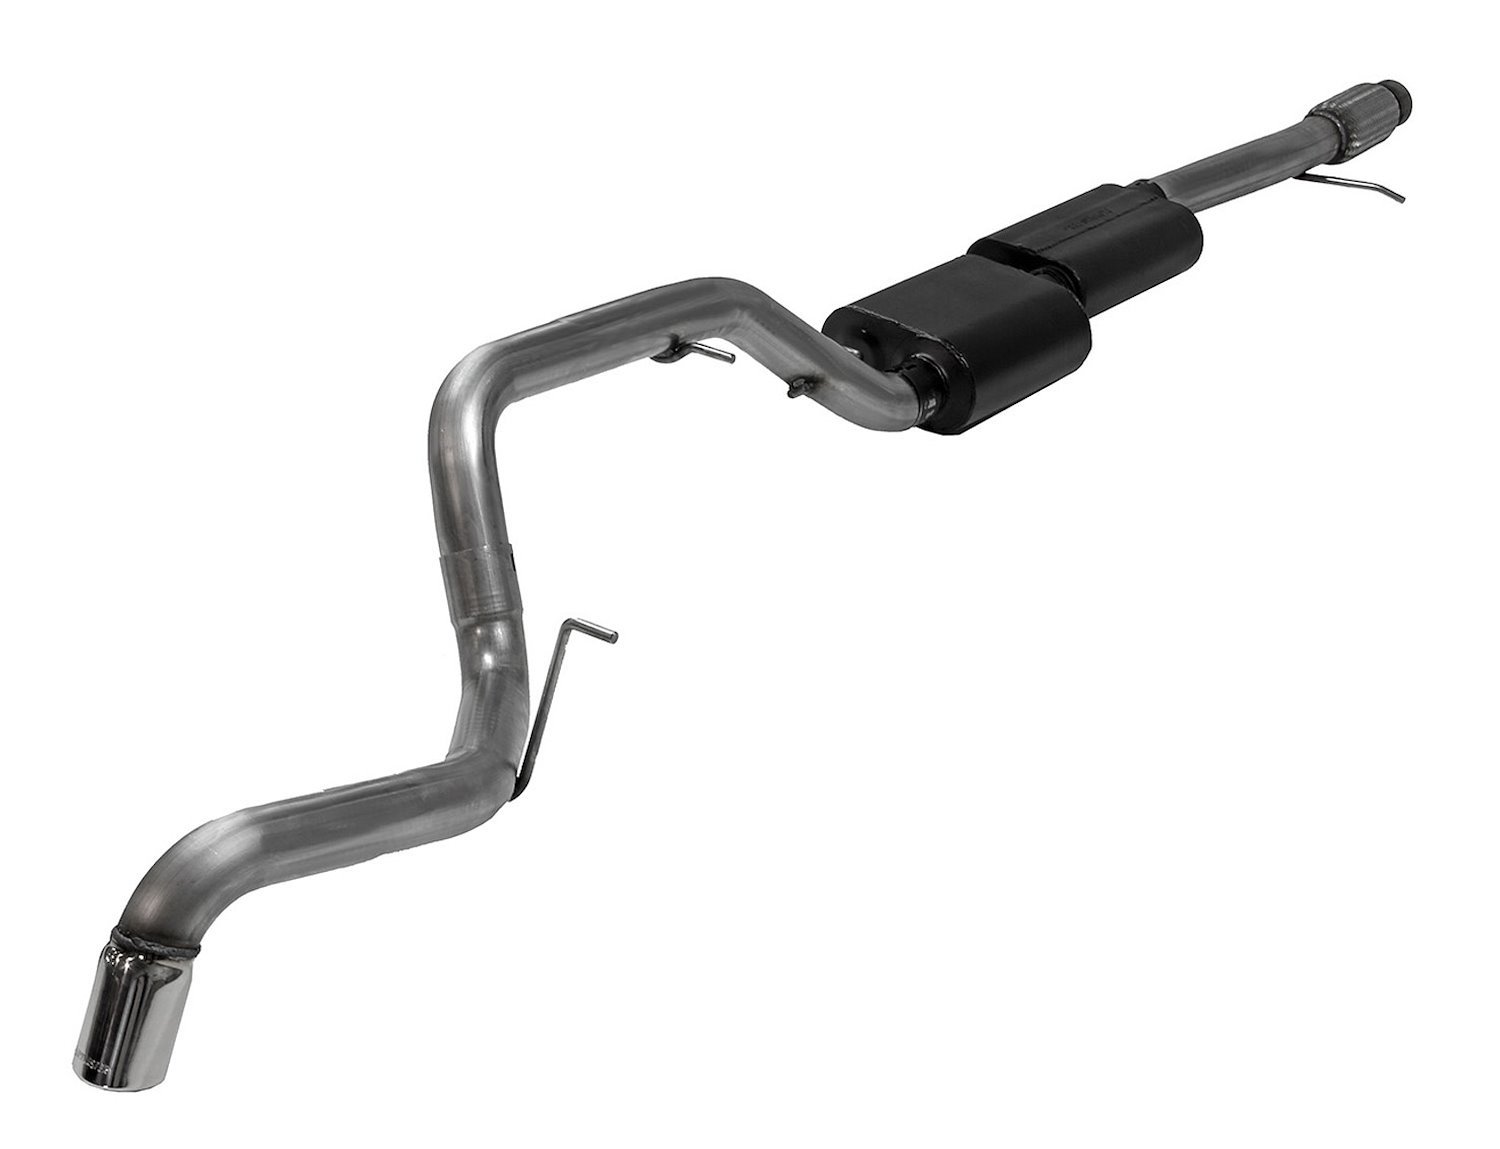 Force II Cat-Back Exhaust System Fits Select Chevy Tahoe, GMC Yukon 5.3L